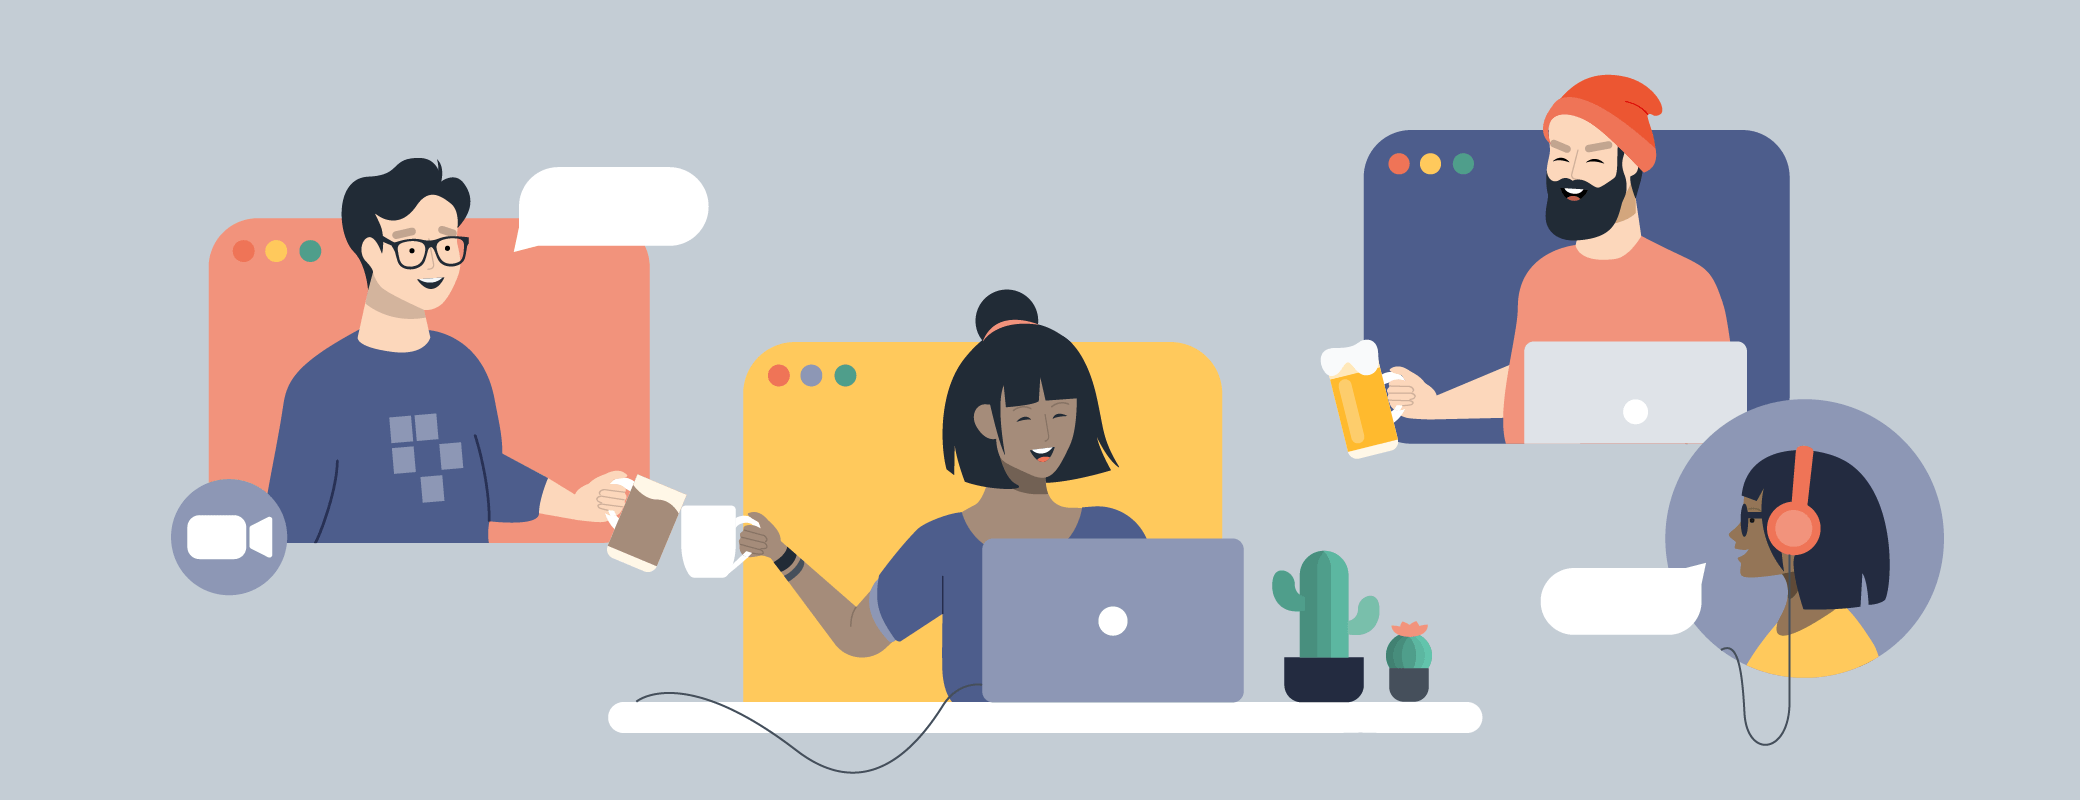 Going remote: 3 tips for building a strong remote work culture